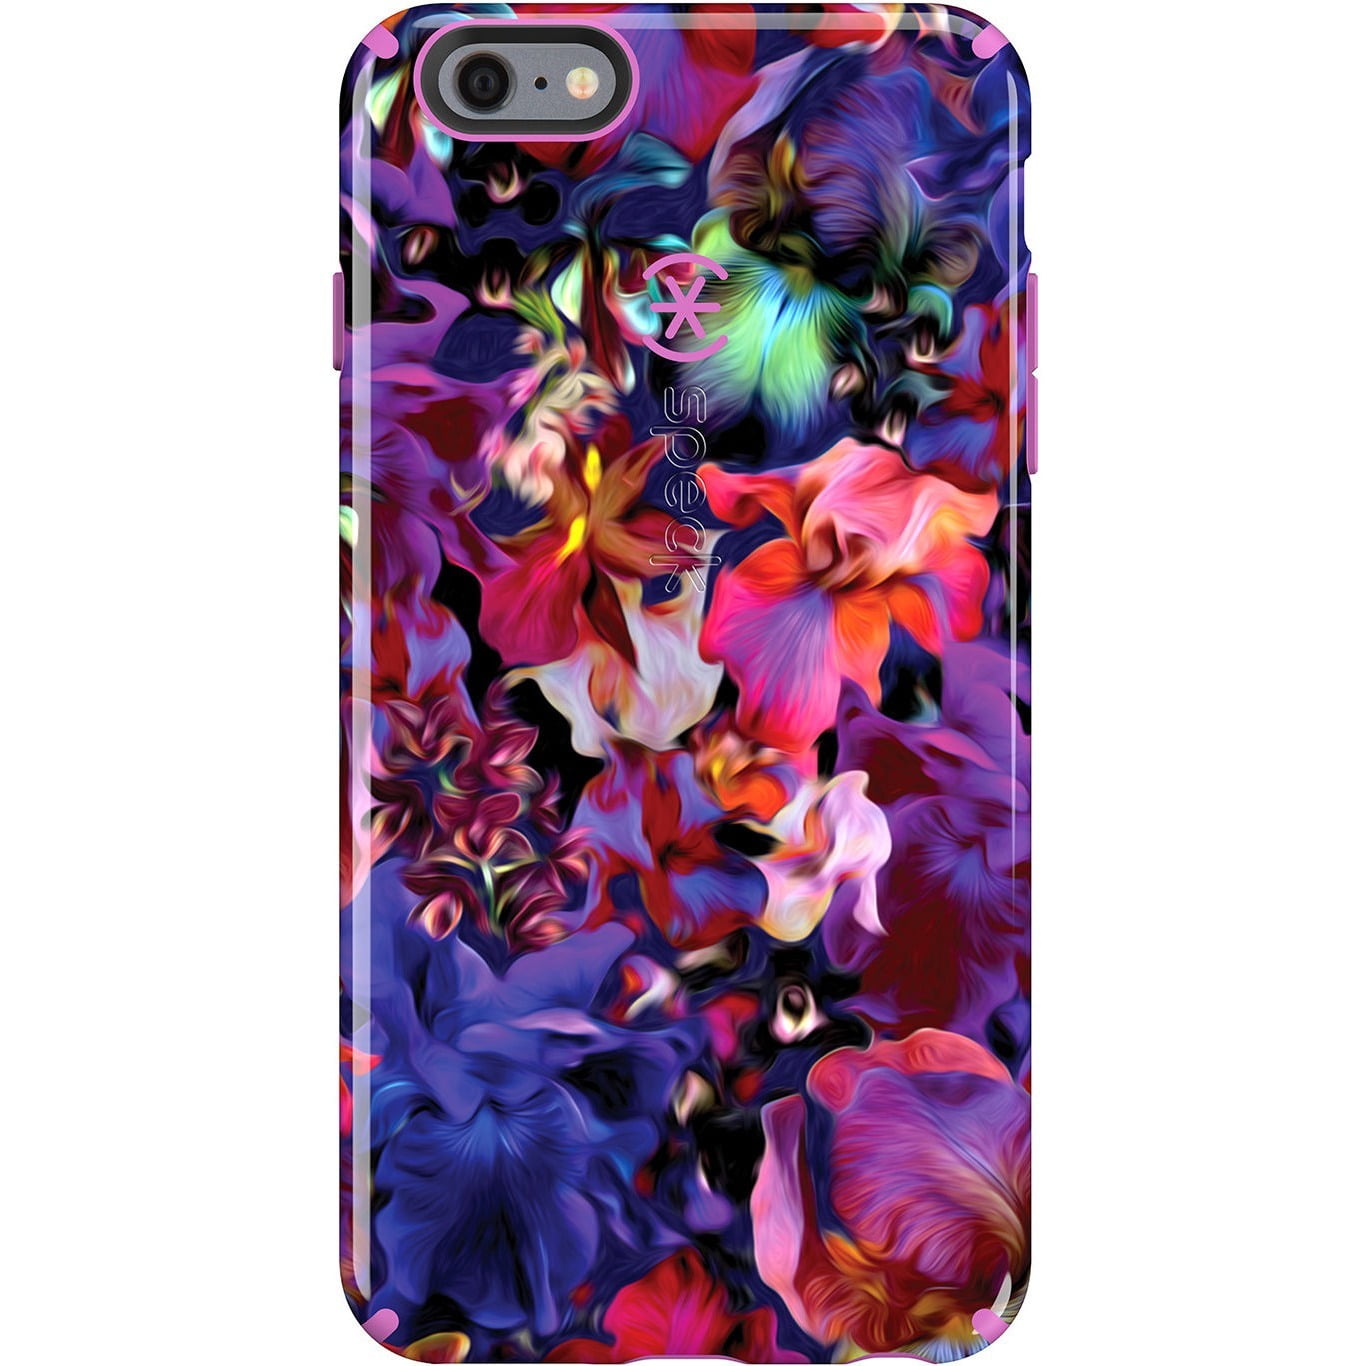 Speck CandyShell Inked iPhone 6s Plus & iPhone 6 Plus Cases - Walmart ...